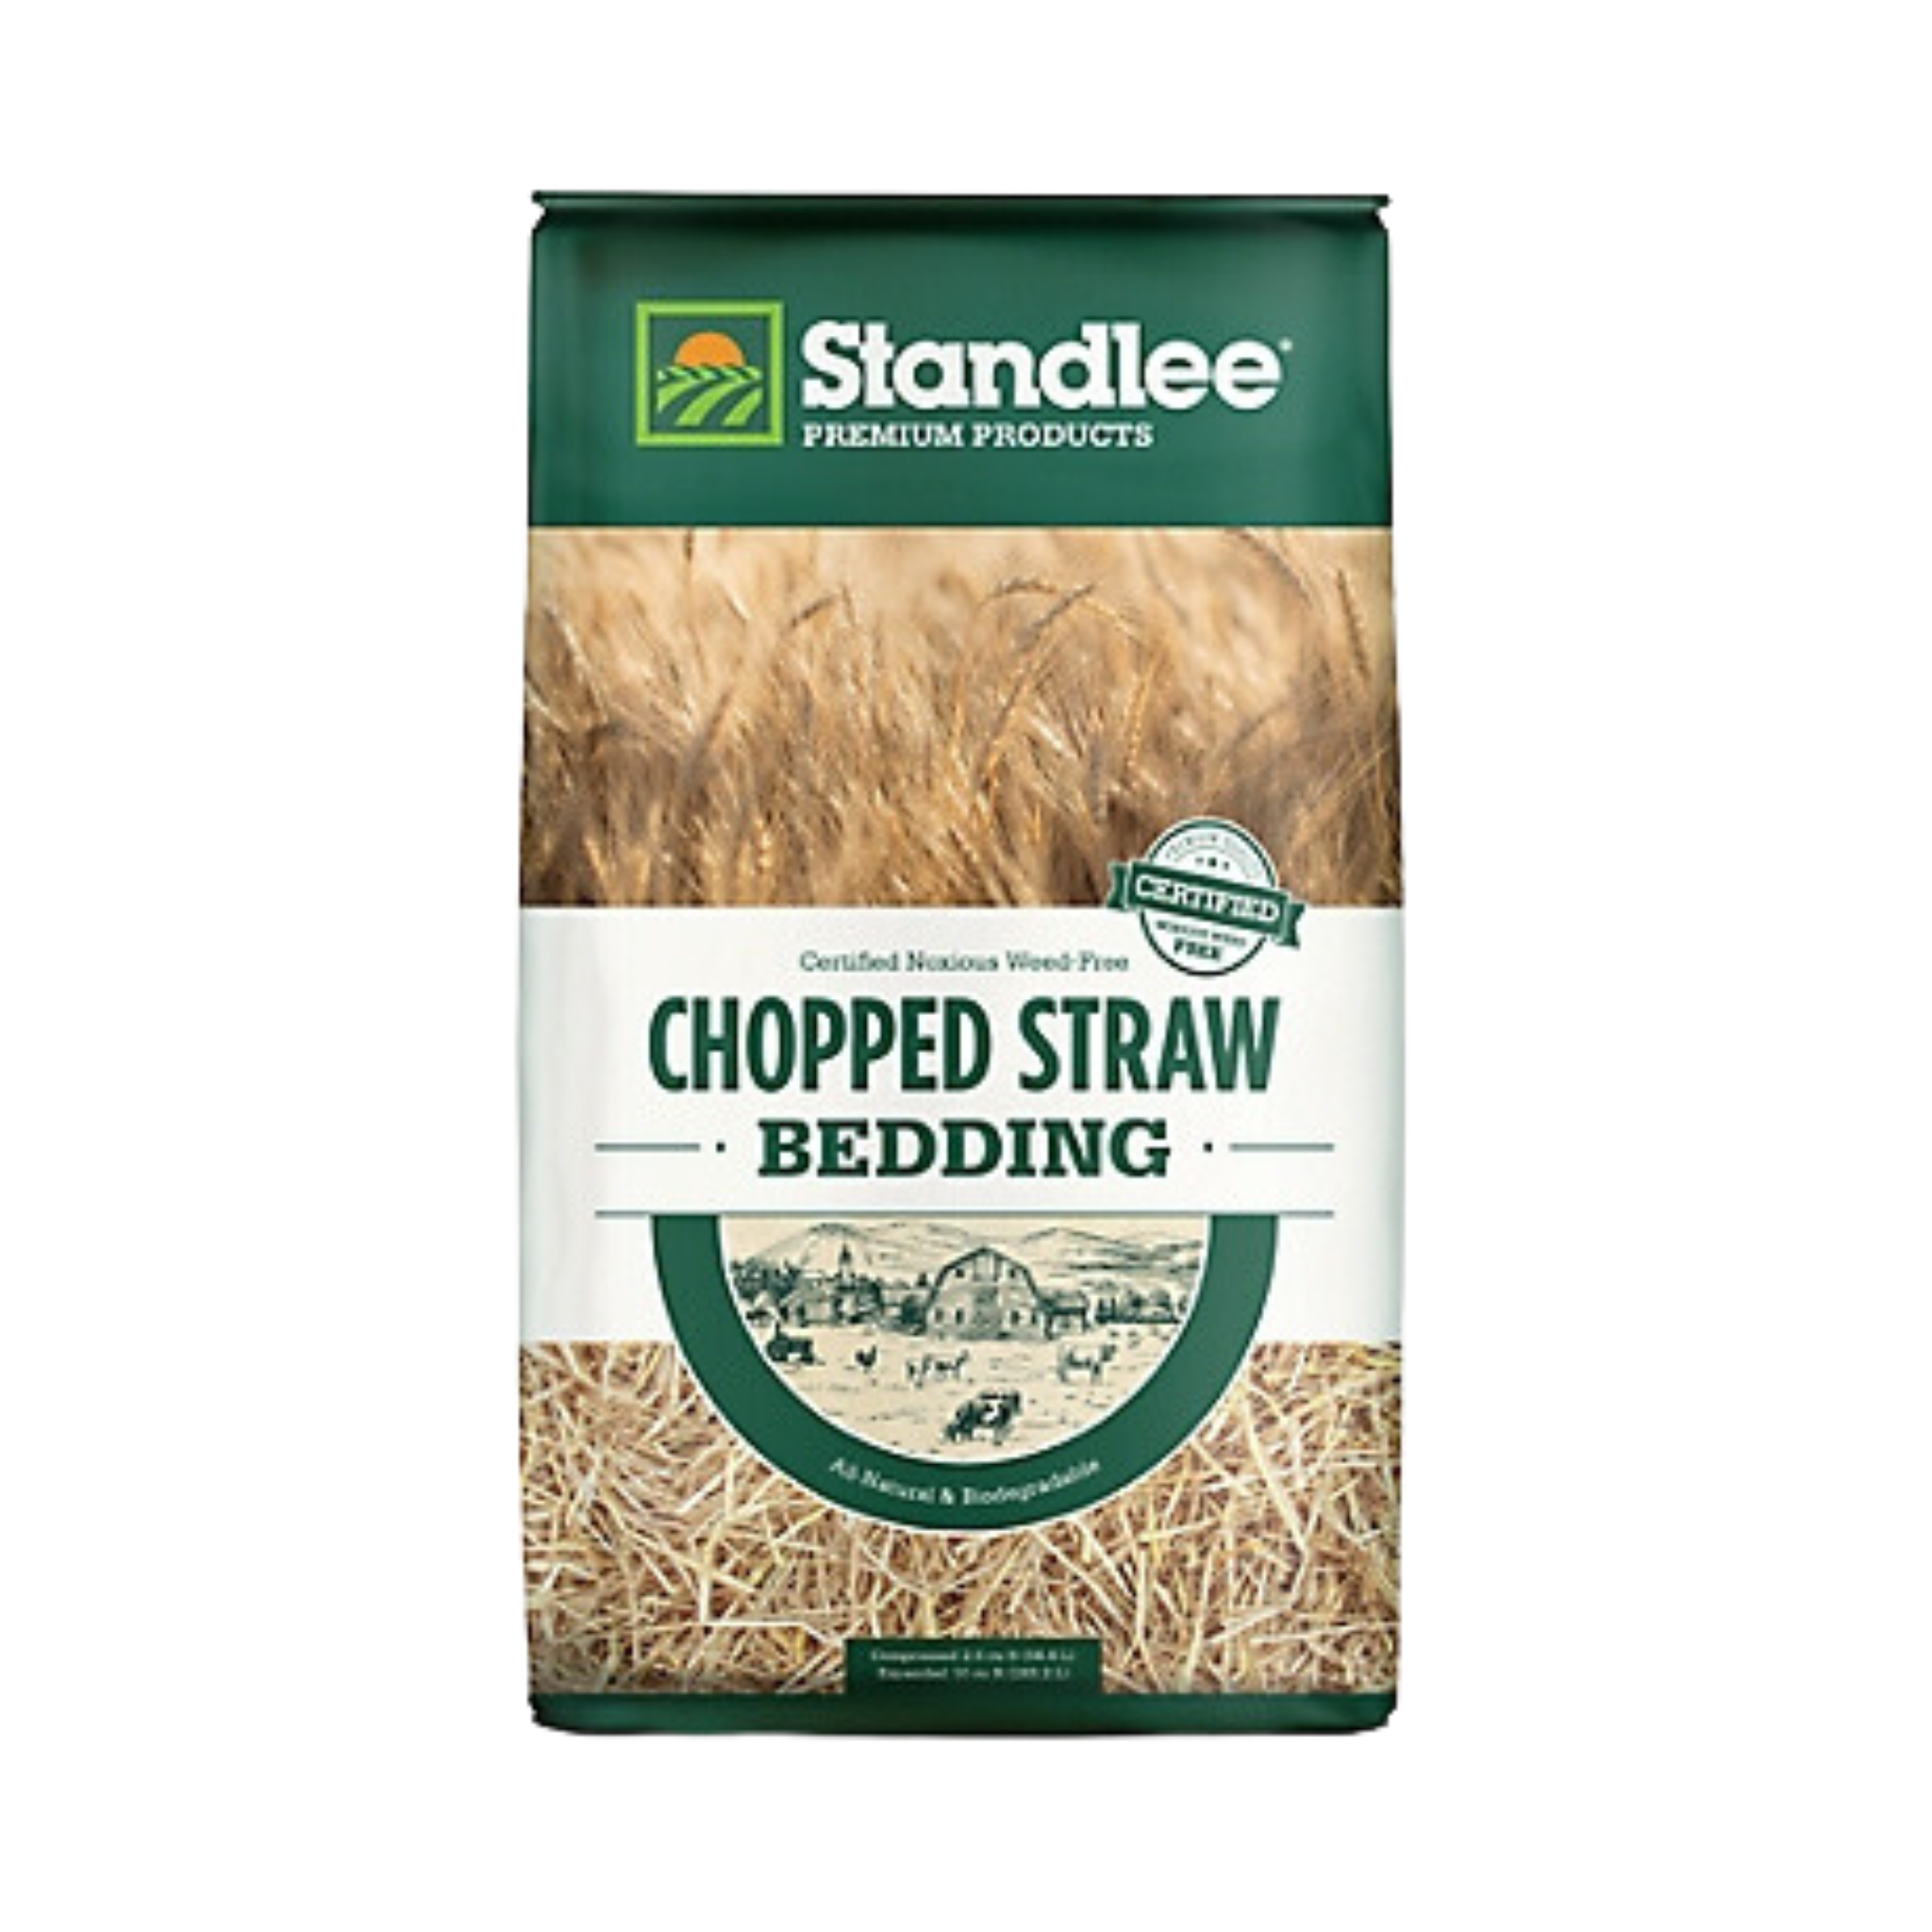 Standlee Certified Weed Free Chopped Straw Bagged